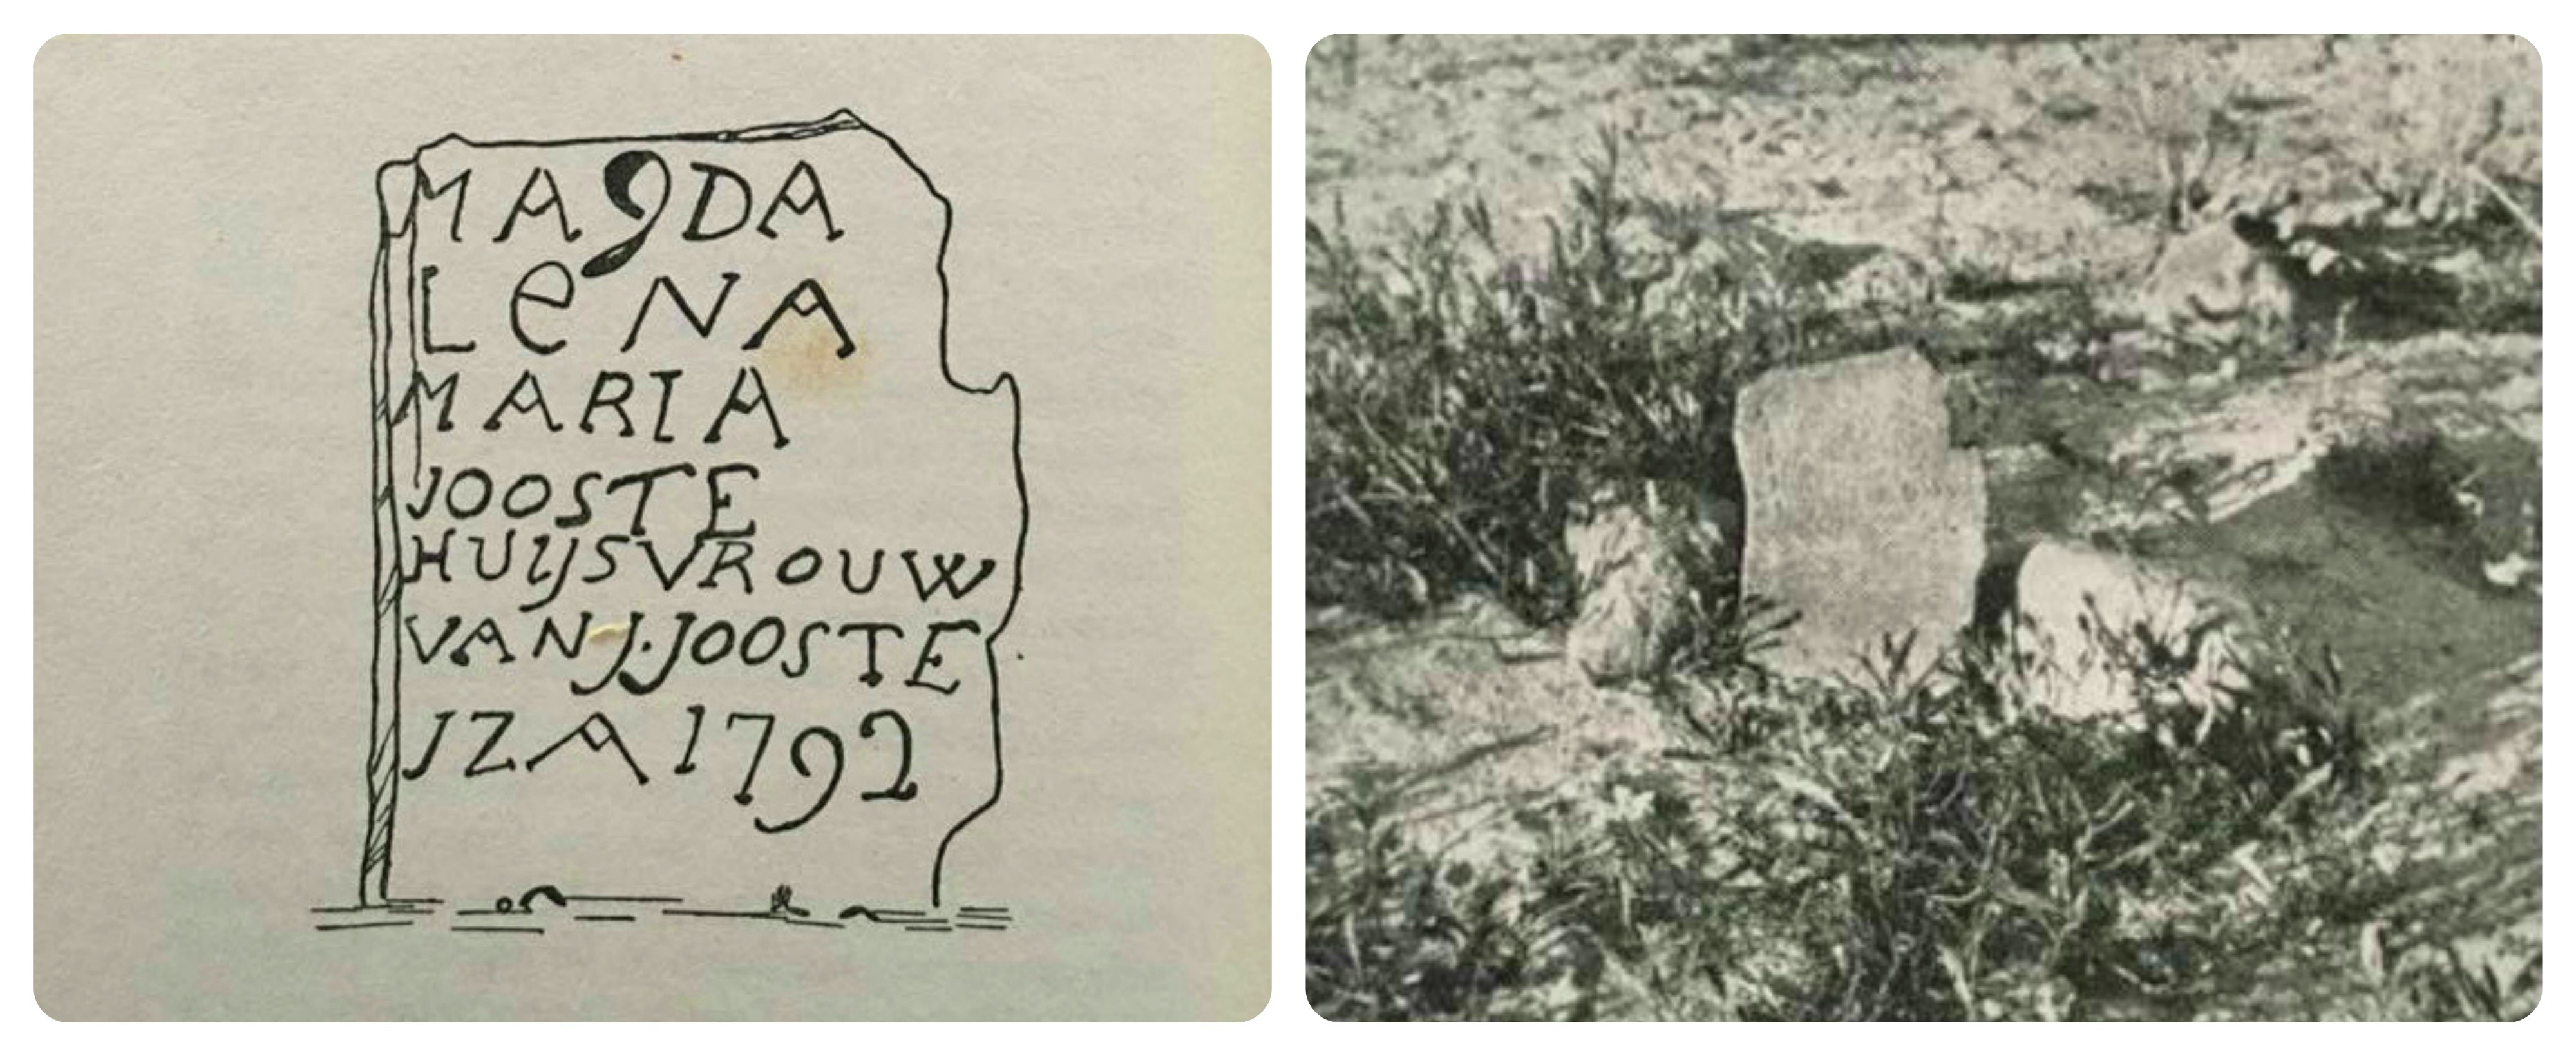 A drawing and a photograph by E.E. Mossop of Maria Magdalena Jooste's grave, which has since disappeared. 